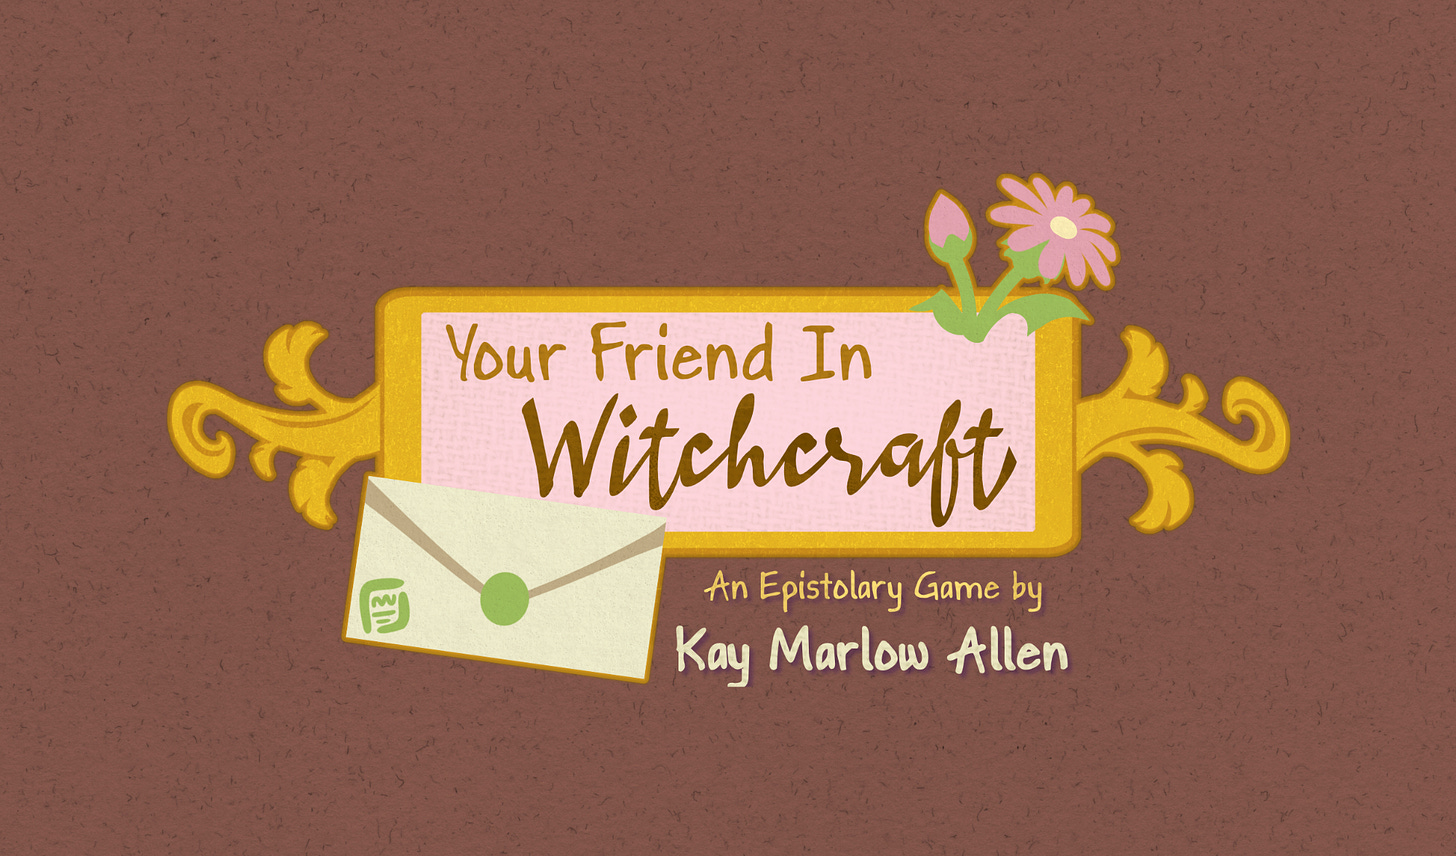 Illustration for Your Friend in Witchcraft. The title is written in a handwriting-like font alongside an image of a sealed letter.